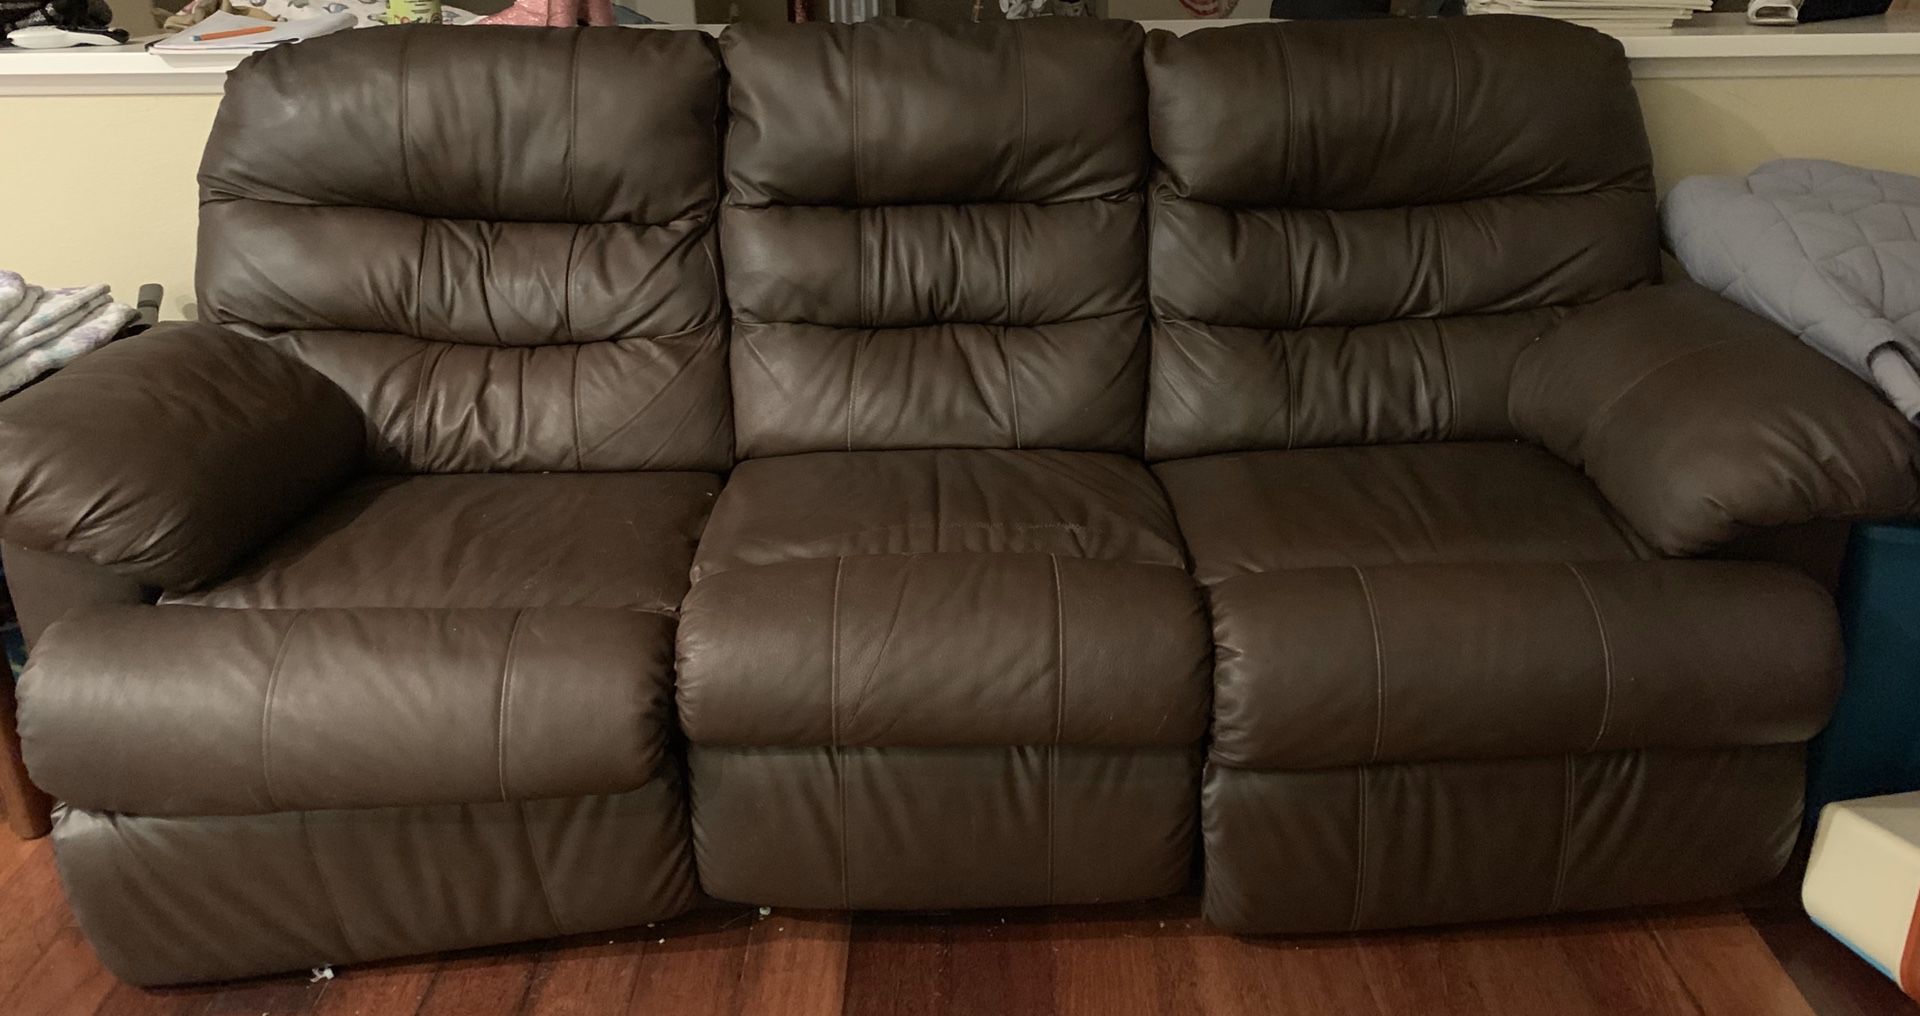 Set of brown leather recliners- sofa and loveseat